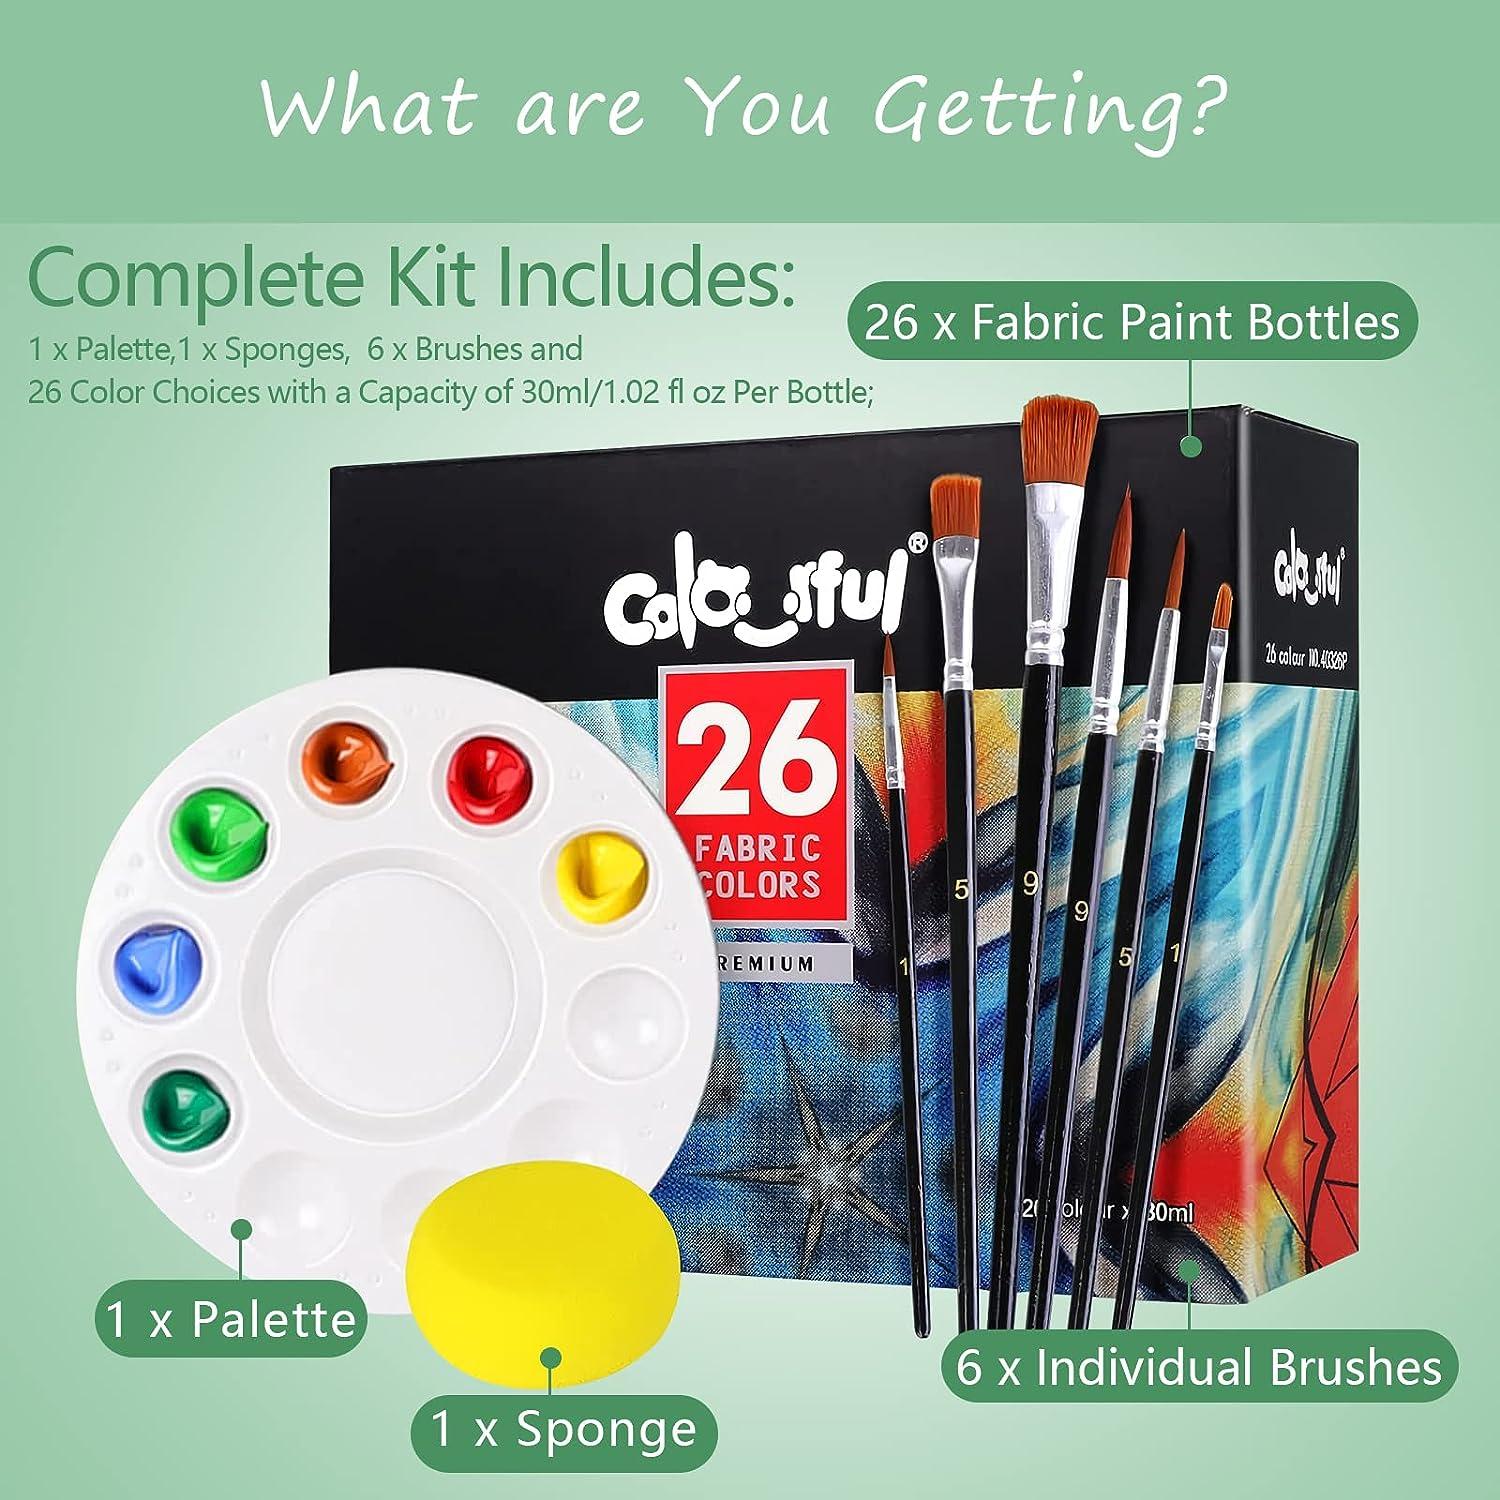 Colorful Glass Paint Kit with 6 Brushes, 1 Palette & 1 Sponge